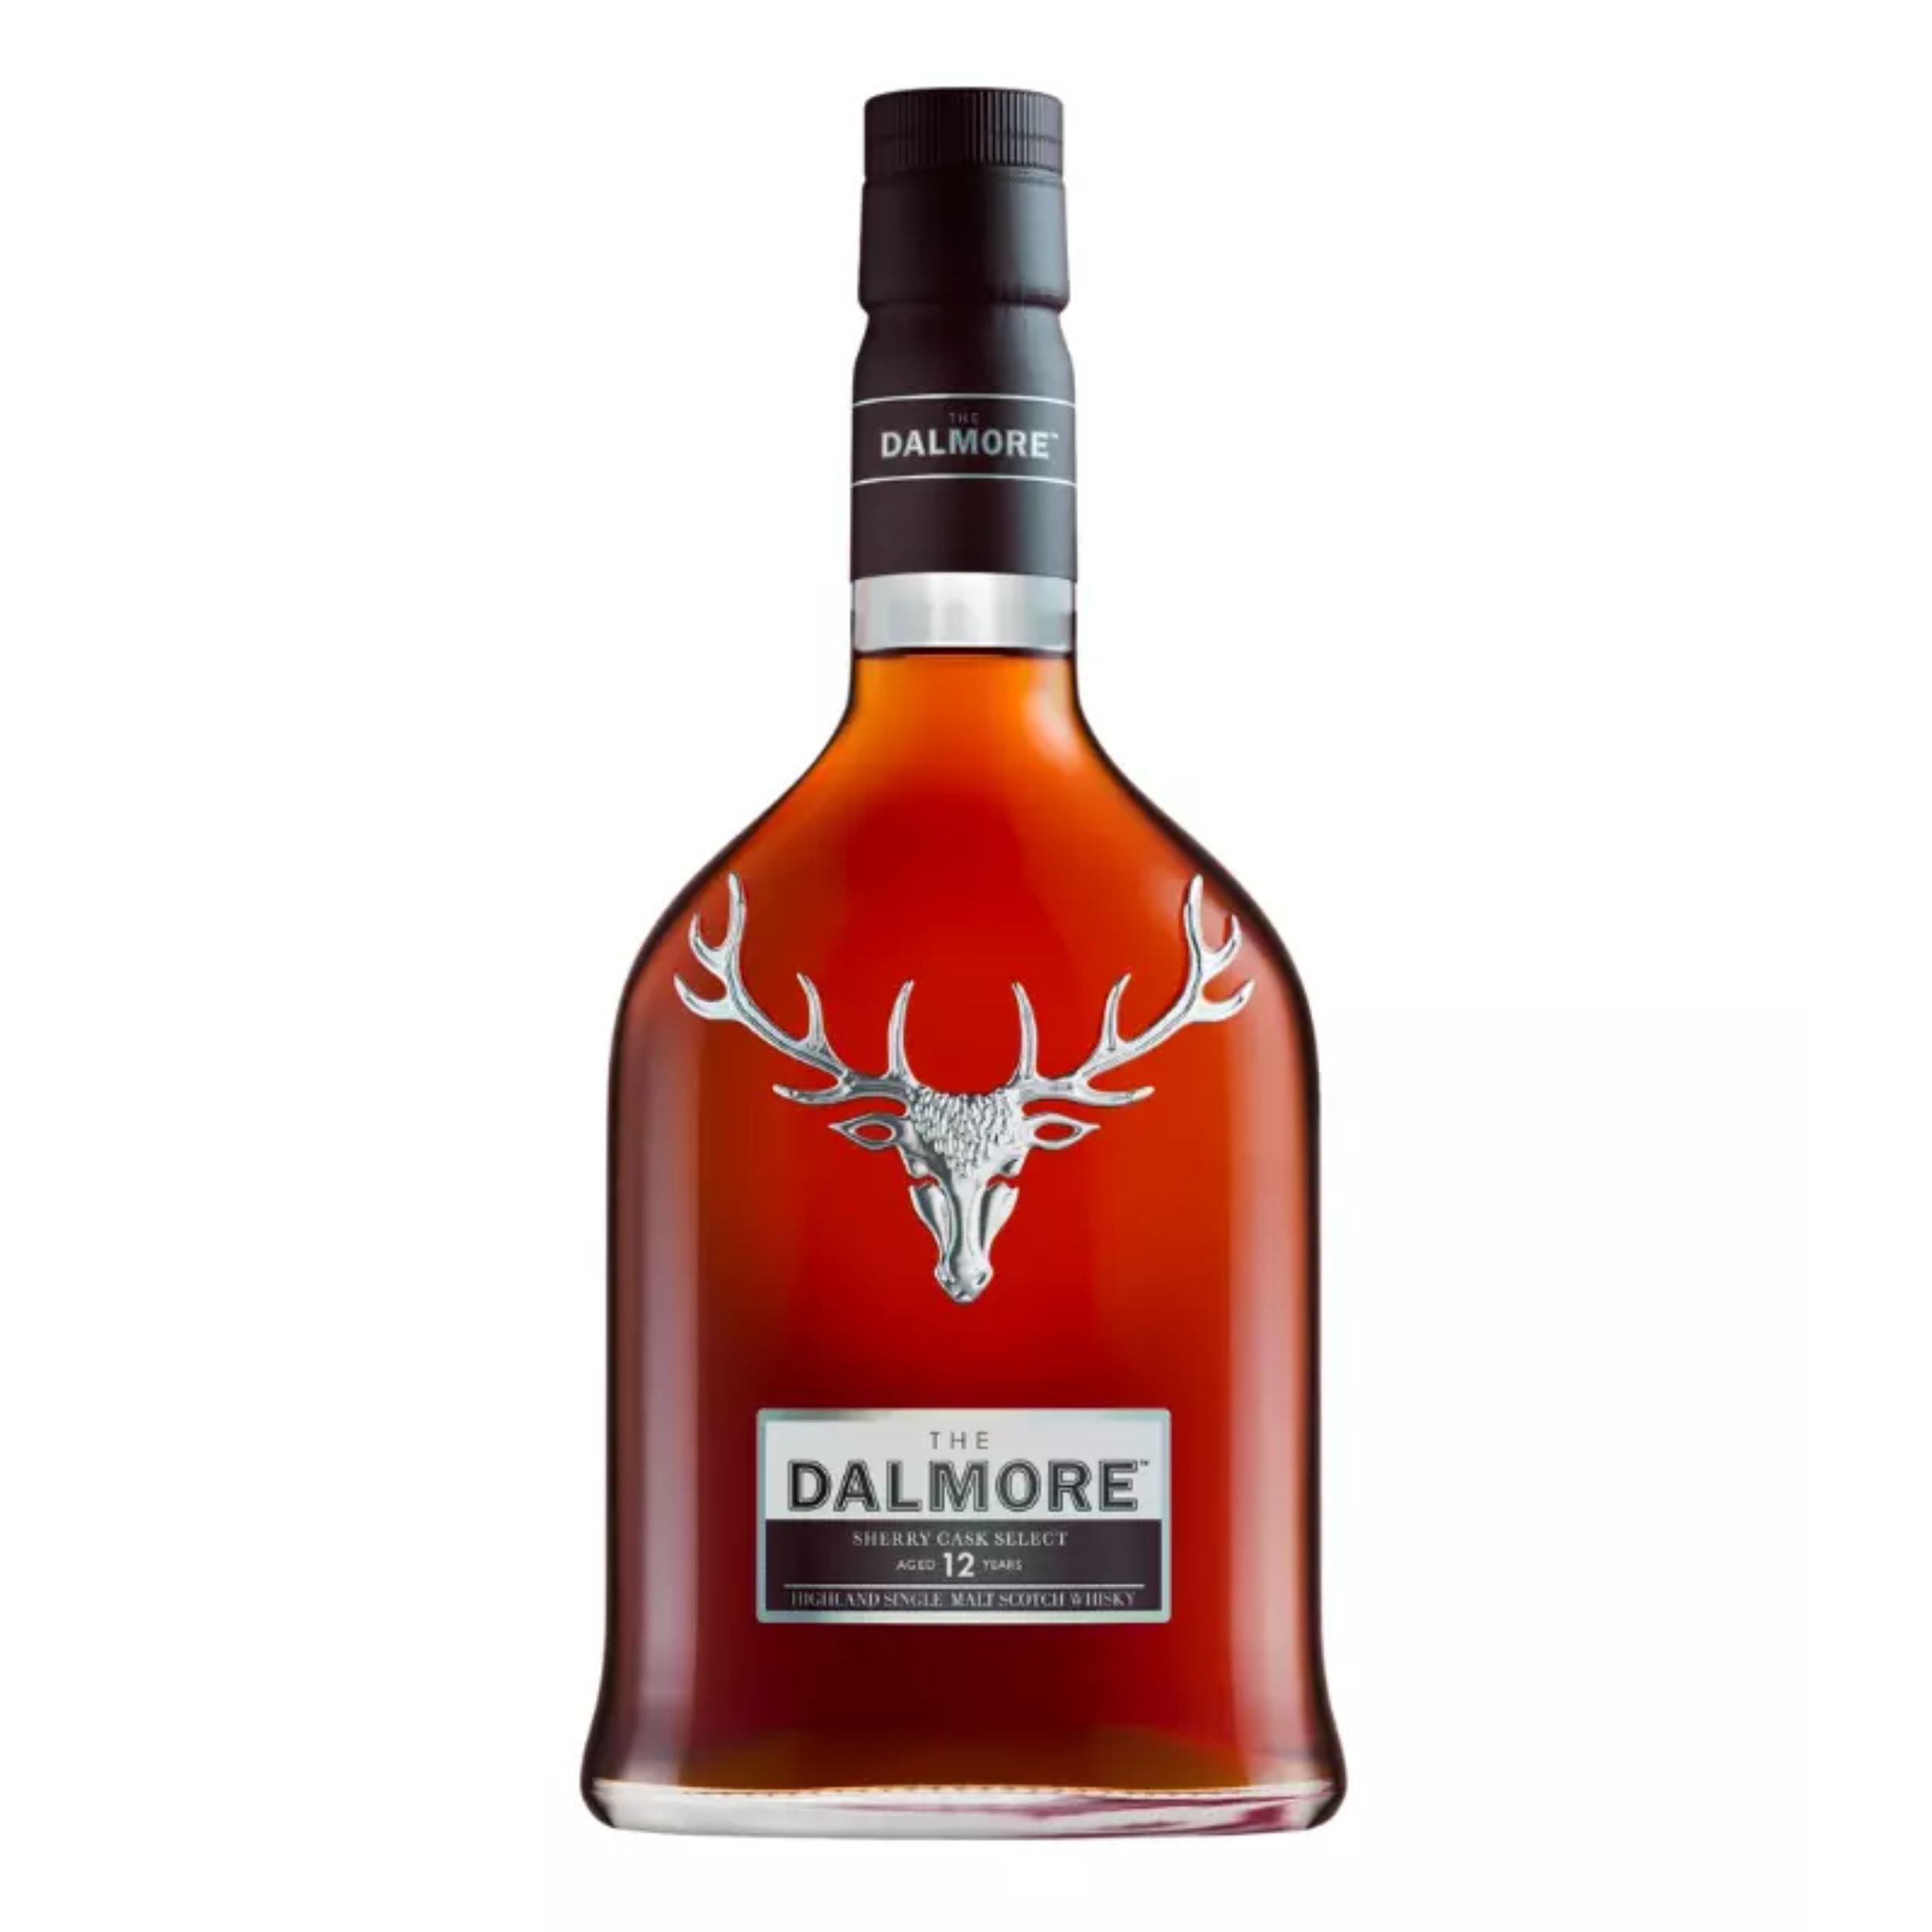 The-Dalmore-12y-Sherry-Cask-Select